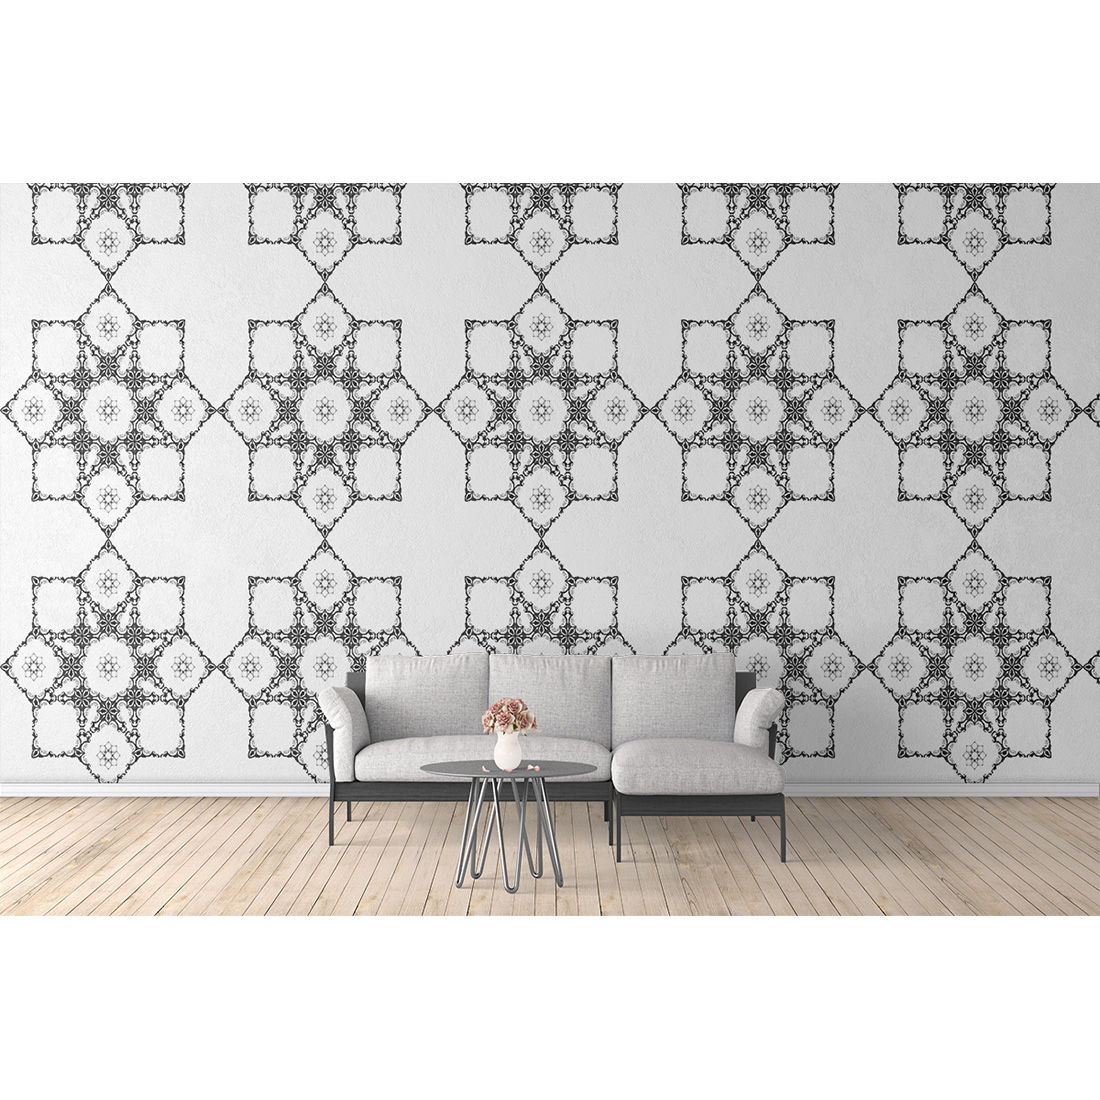 Image with irresistible geometric patterns